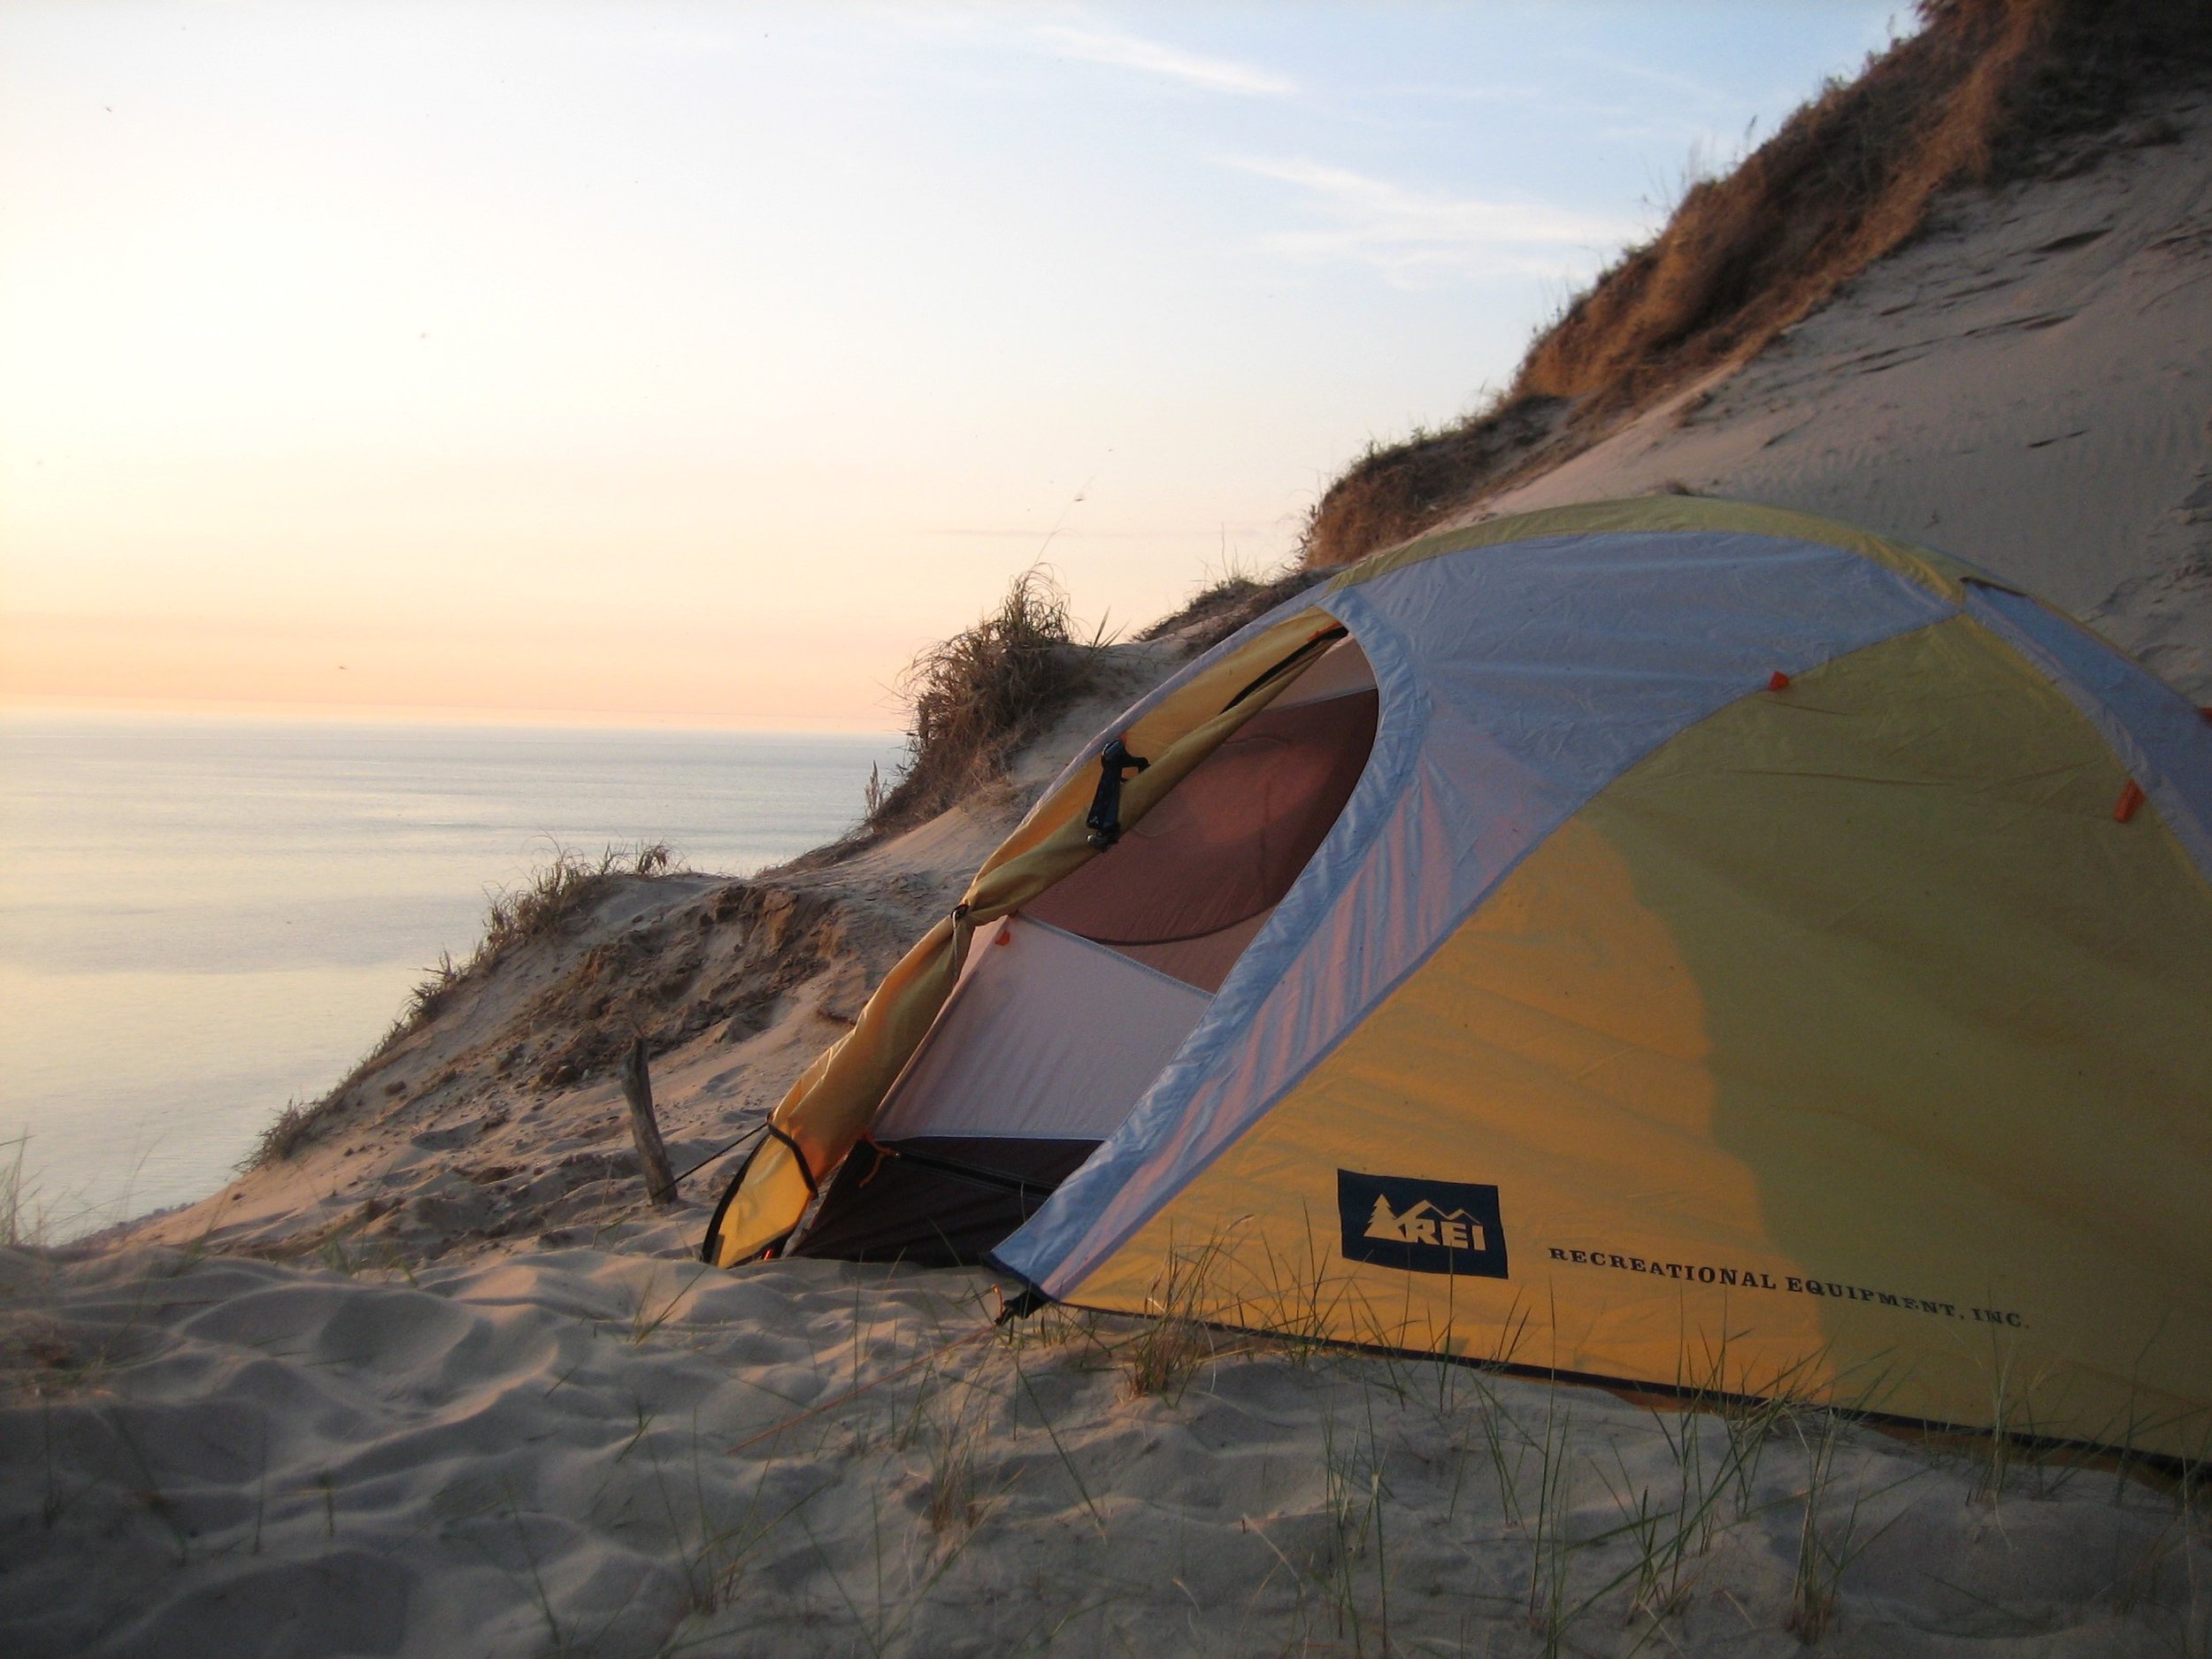 Camping on North Manitou Island: Discover a Wilderness Trail.